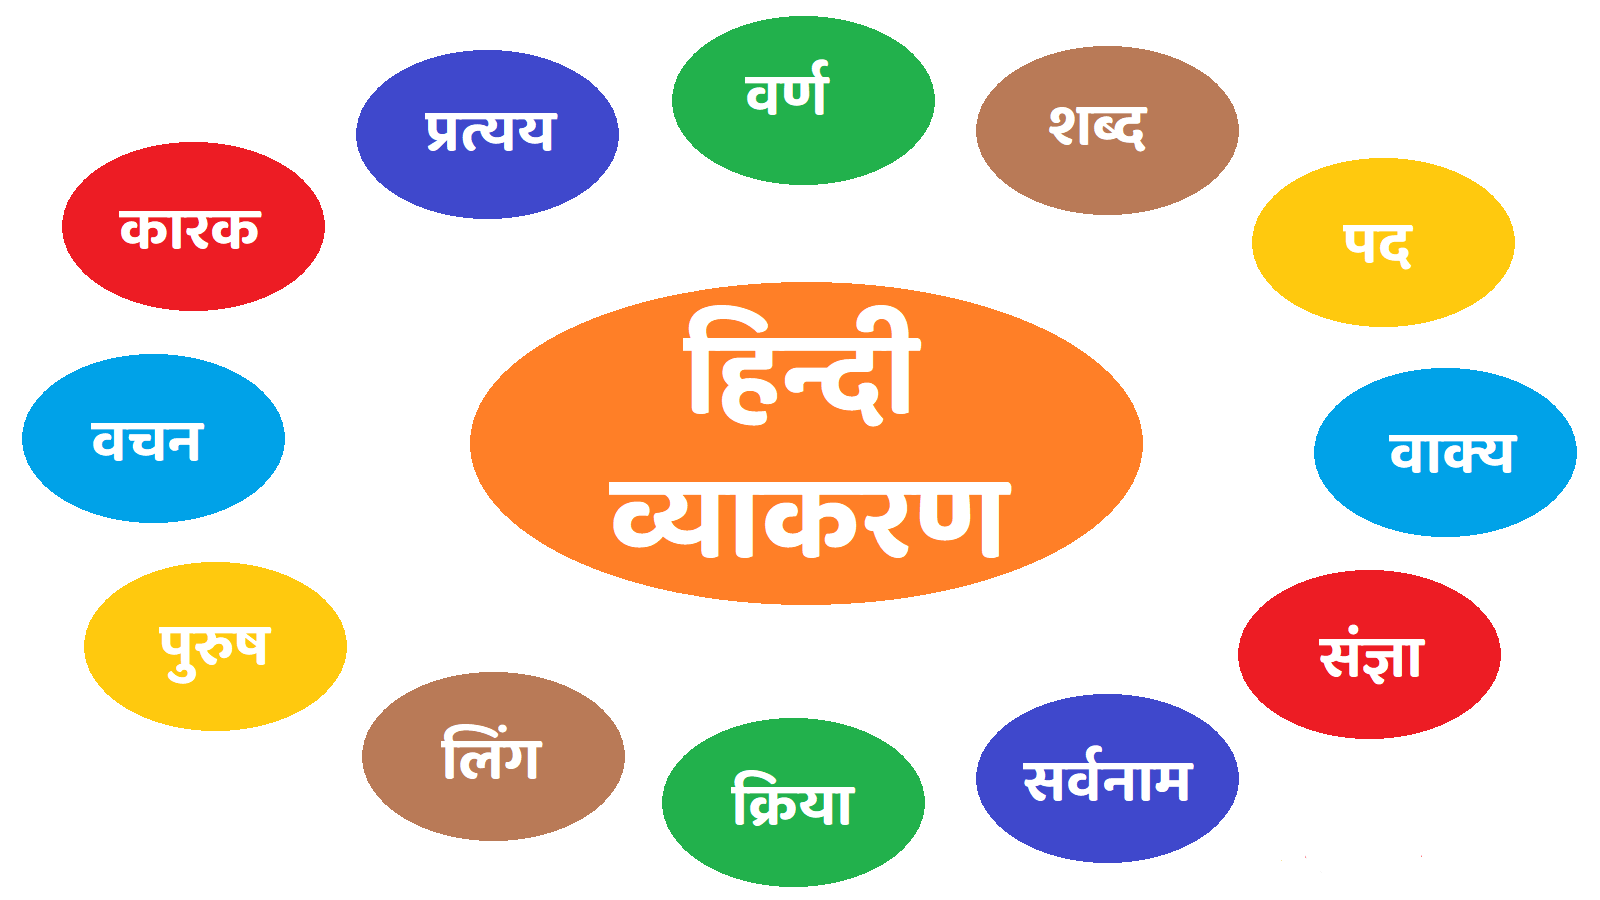 Hindi Grammar Online Test for competitive exams